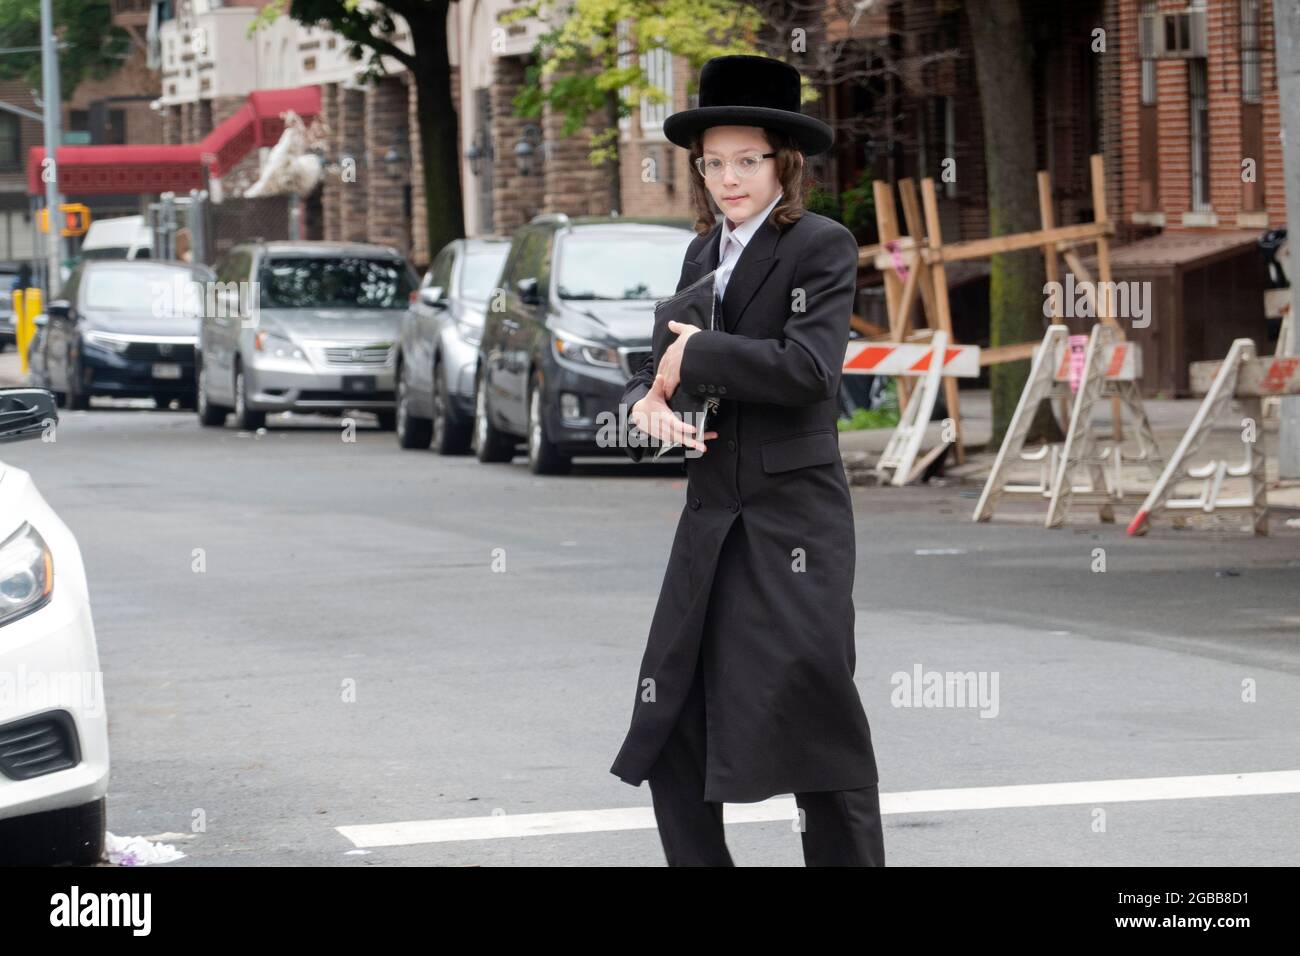 A young orthodox Jewish man who appears to be a teenager, crosses a street in Williamsburg, Brooklyn on the way to morning prayers. Stock Photo